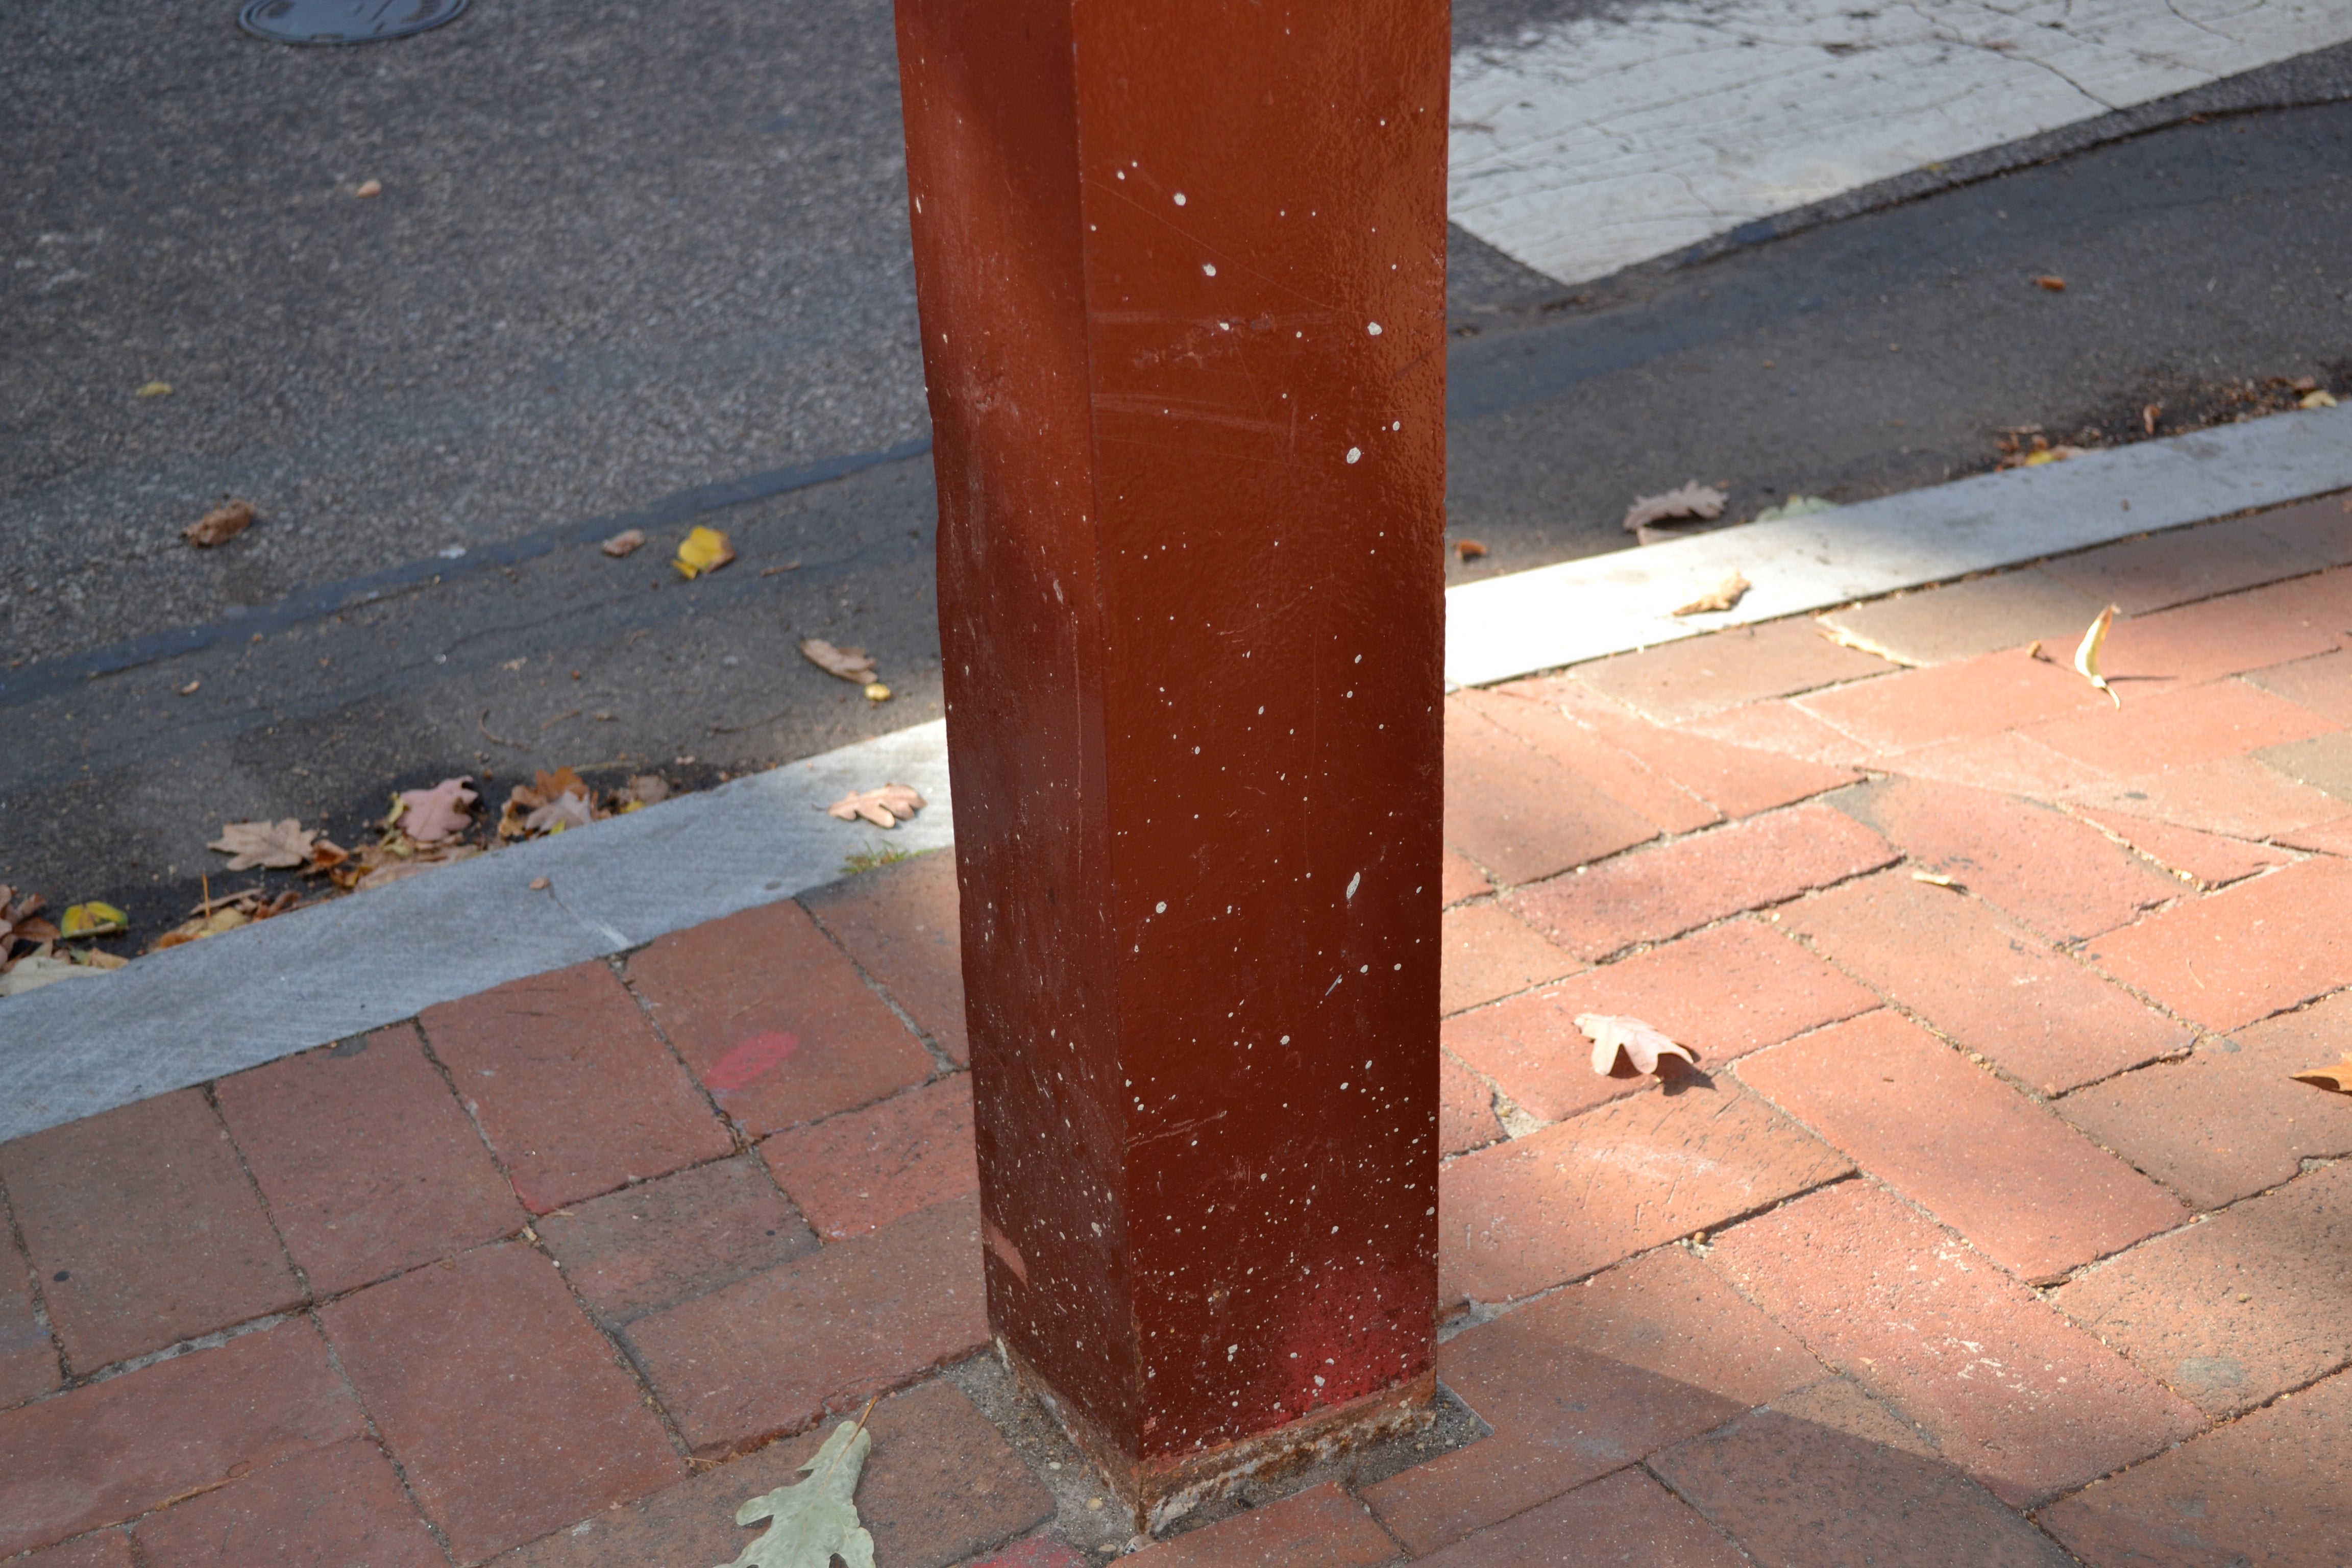 SHCA is upset that contractors splattered concrete on the historic Franklin light posts, which the civic association had painted in 2009